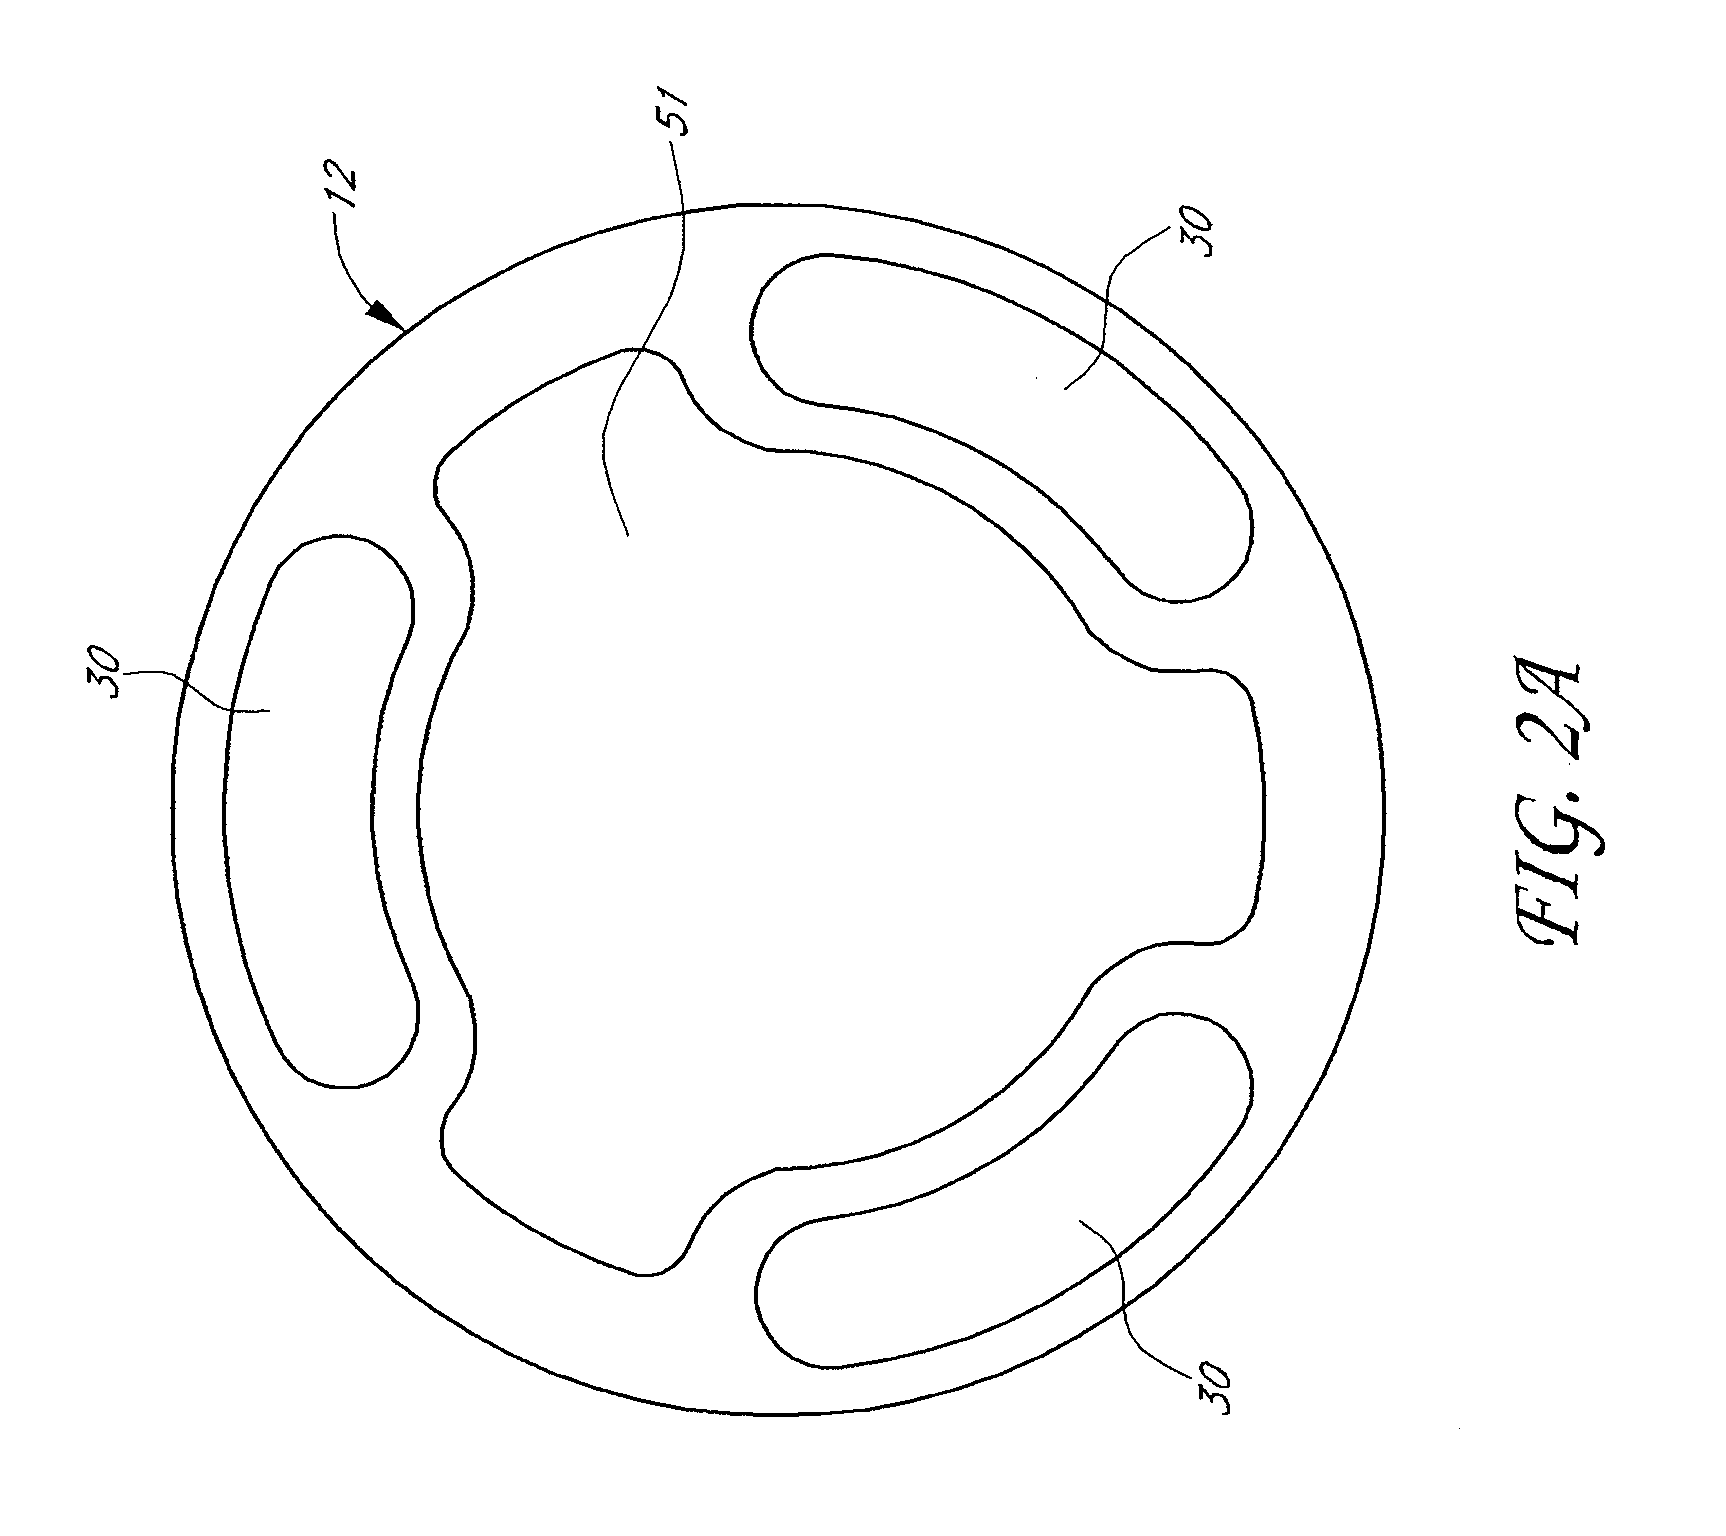 Method and apparatus for treatment of intracranial hemorrhages